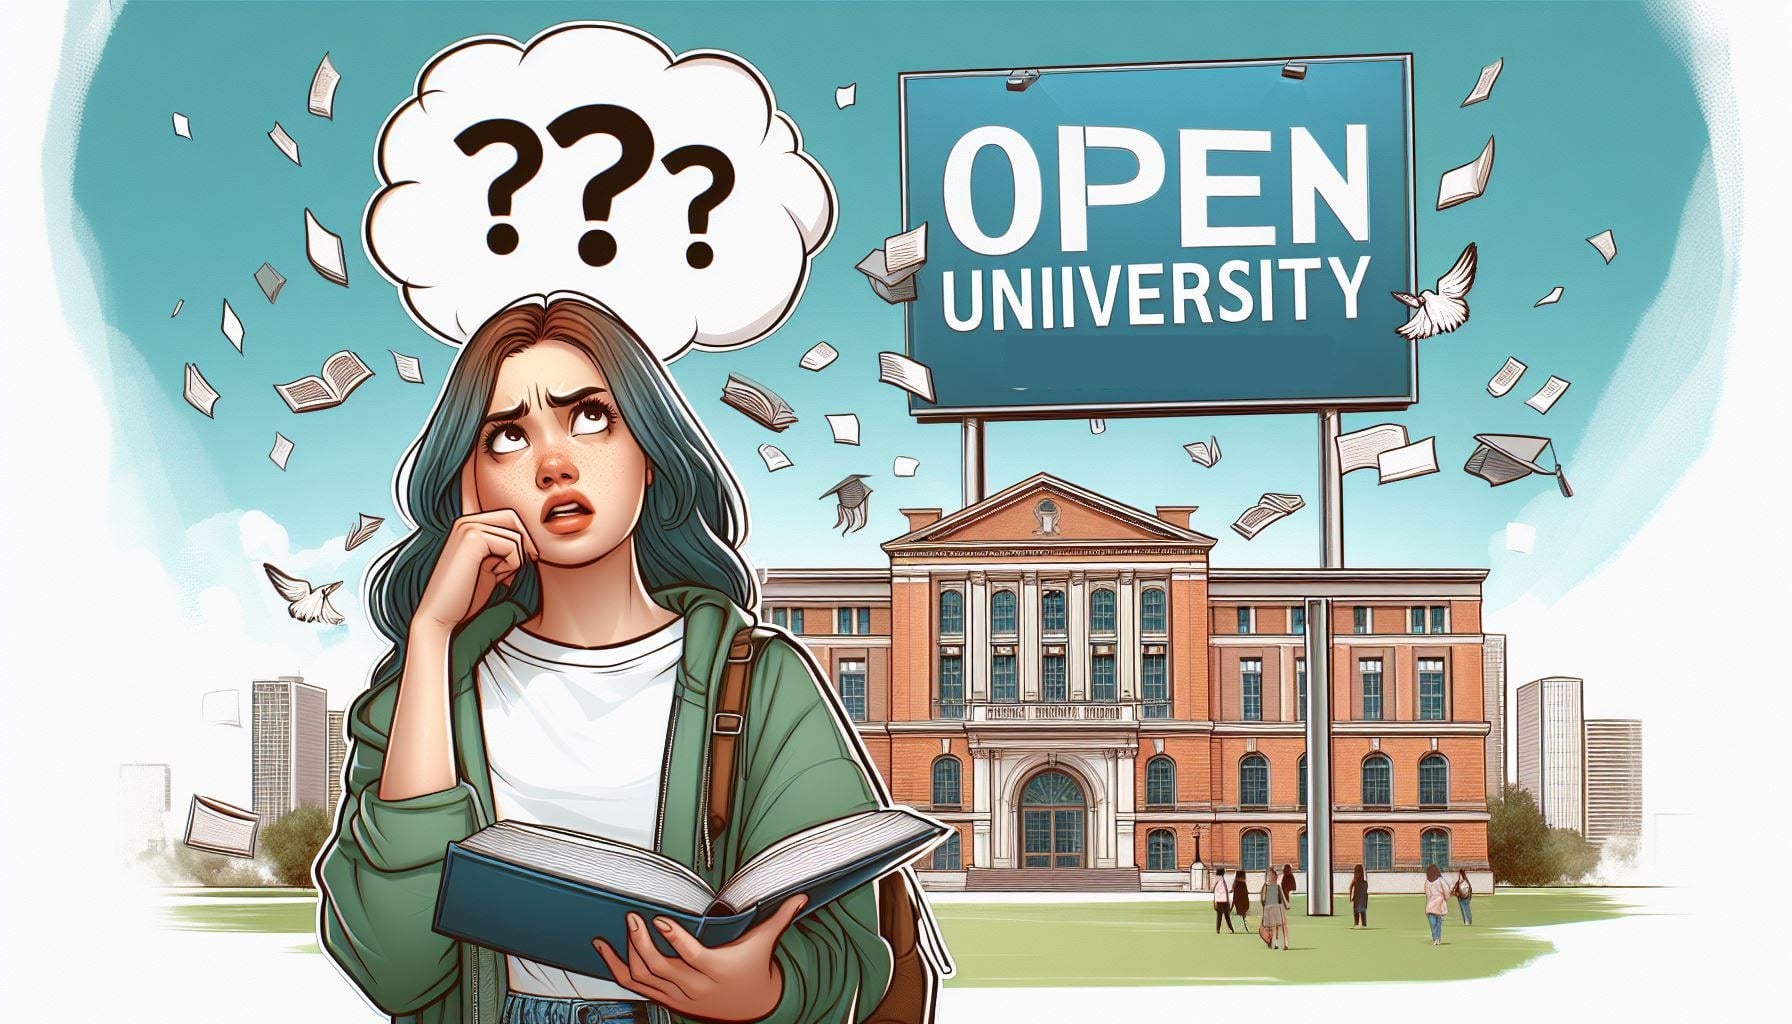 a university in background having "OPEN UNIVERISTY" written in big bold letters. In front, there should be a girl who is not looking happy after studying there and thinking why she studied in this open university